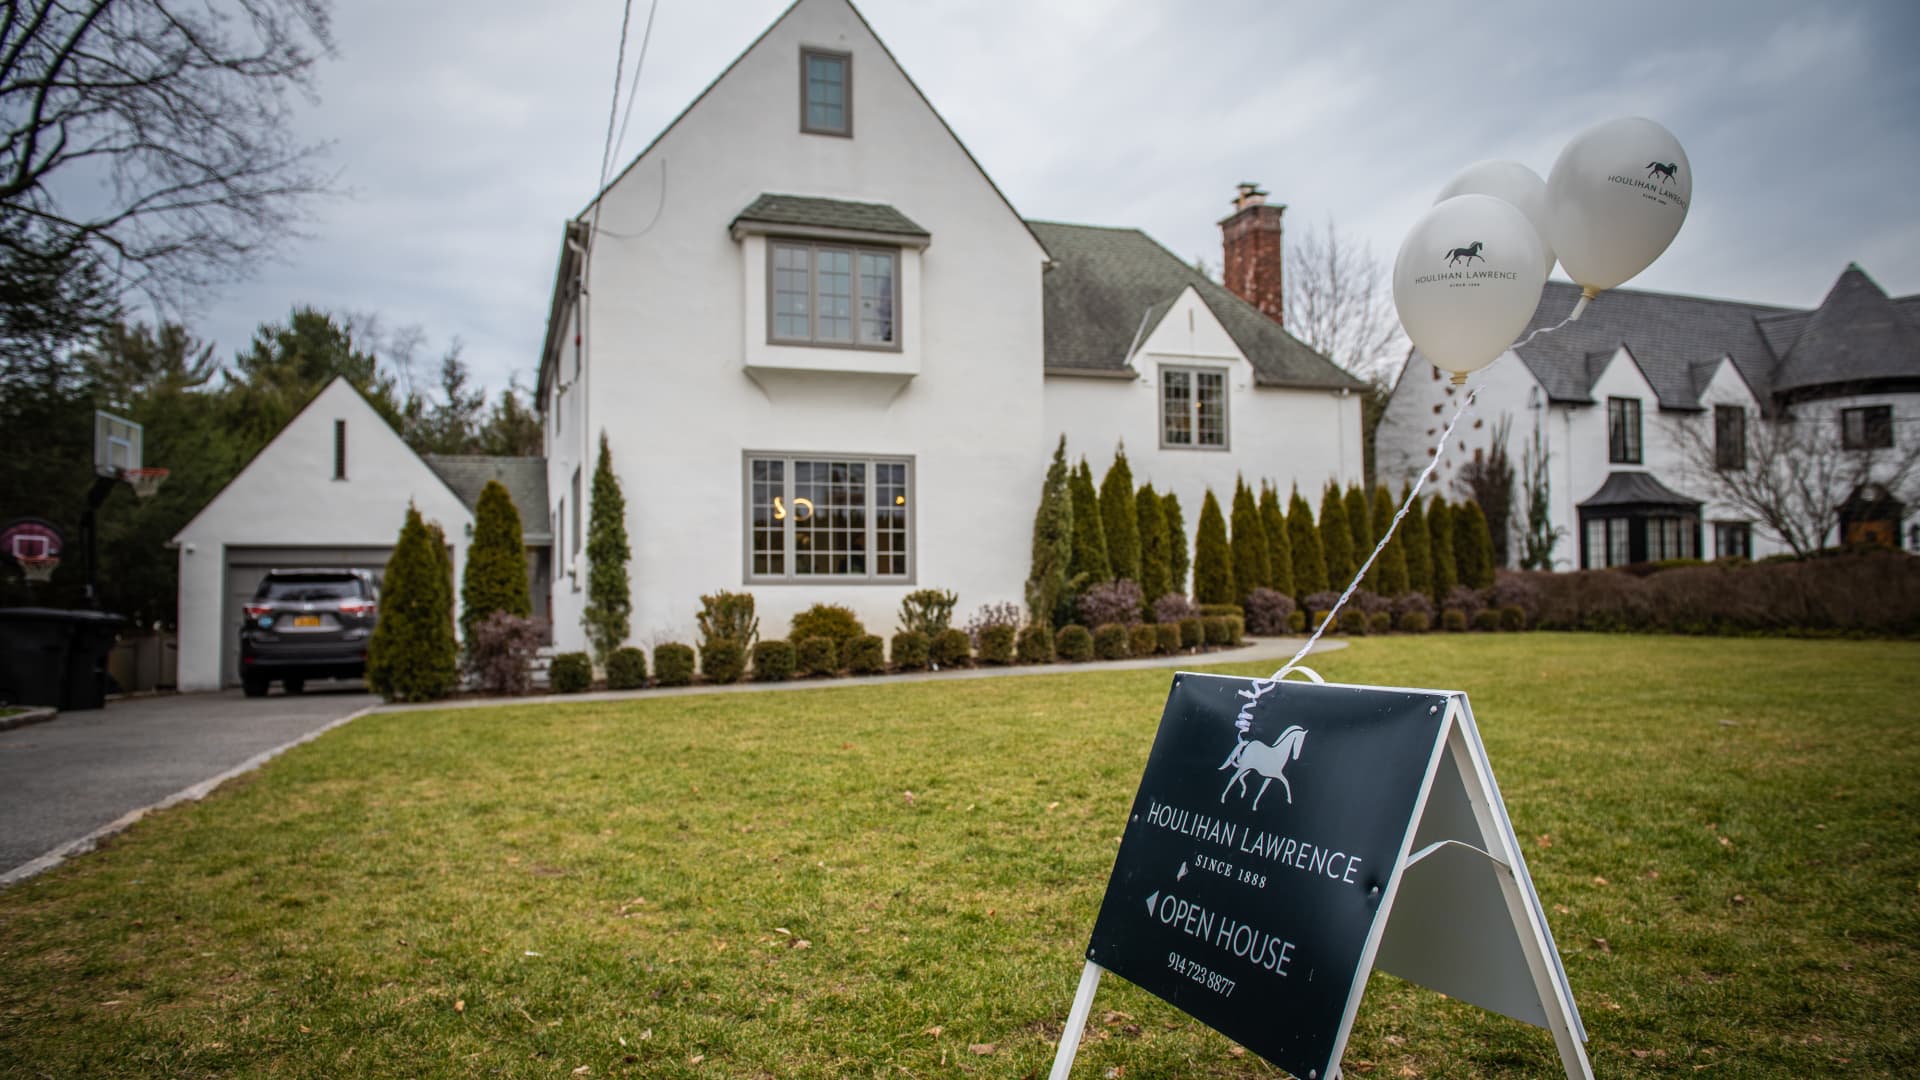 Prospective buyers attend an open house at a home for sale in Larchmont, New York, on Jan. 22, 2023.